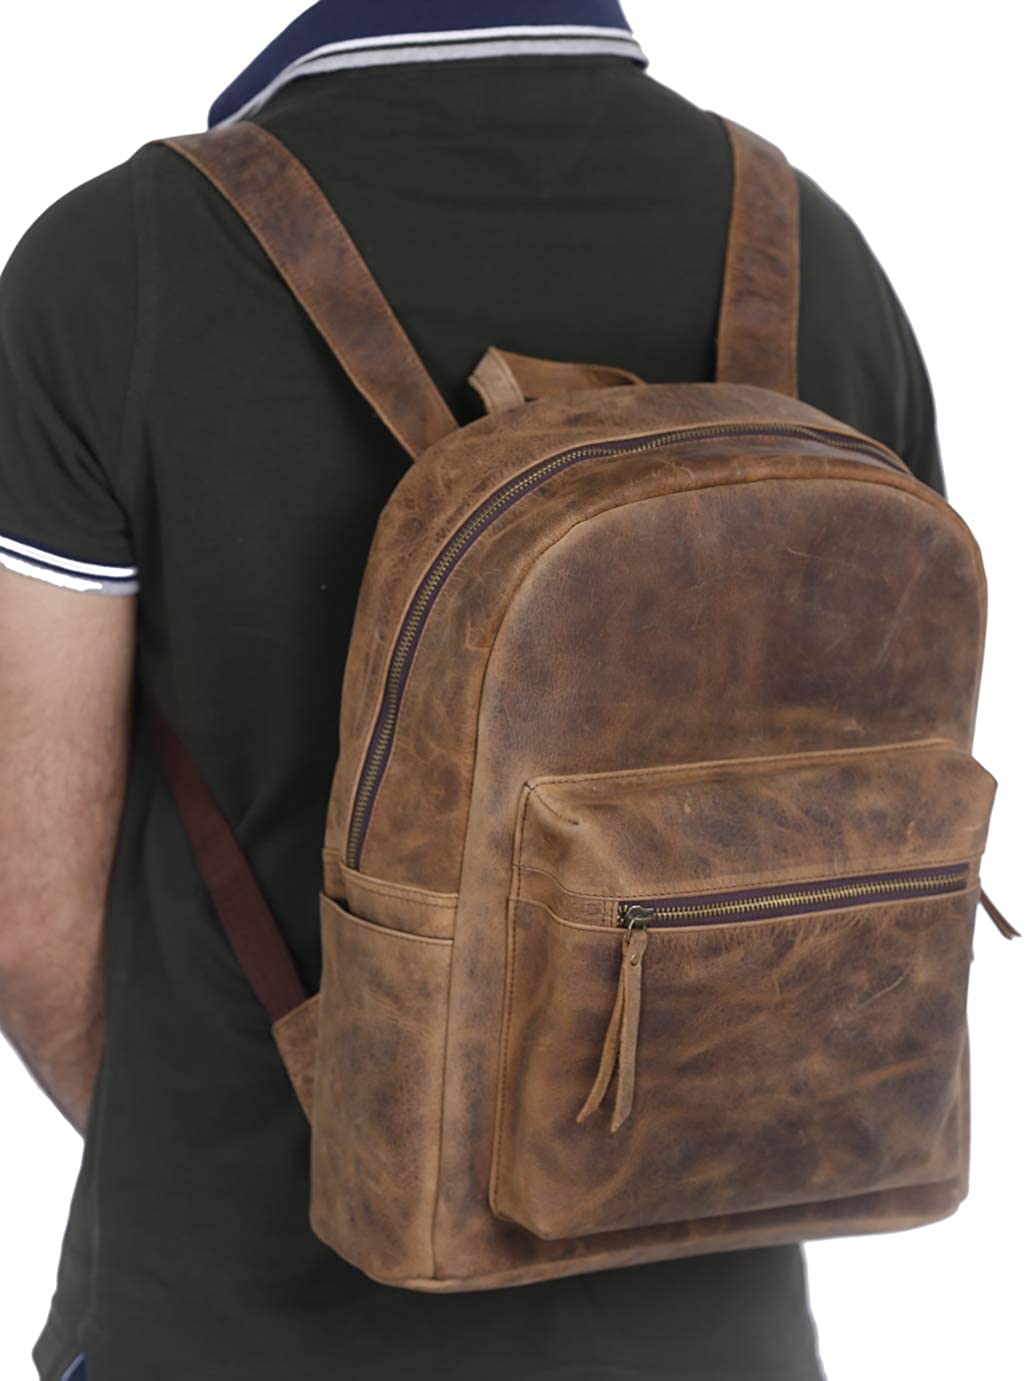 Leather Backpack for Men, 13 Inch Laptop Bag, Work Bag, Birthday Gift for  Him, Genuine Leather Rucksack, Personalized Gift for Men 